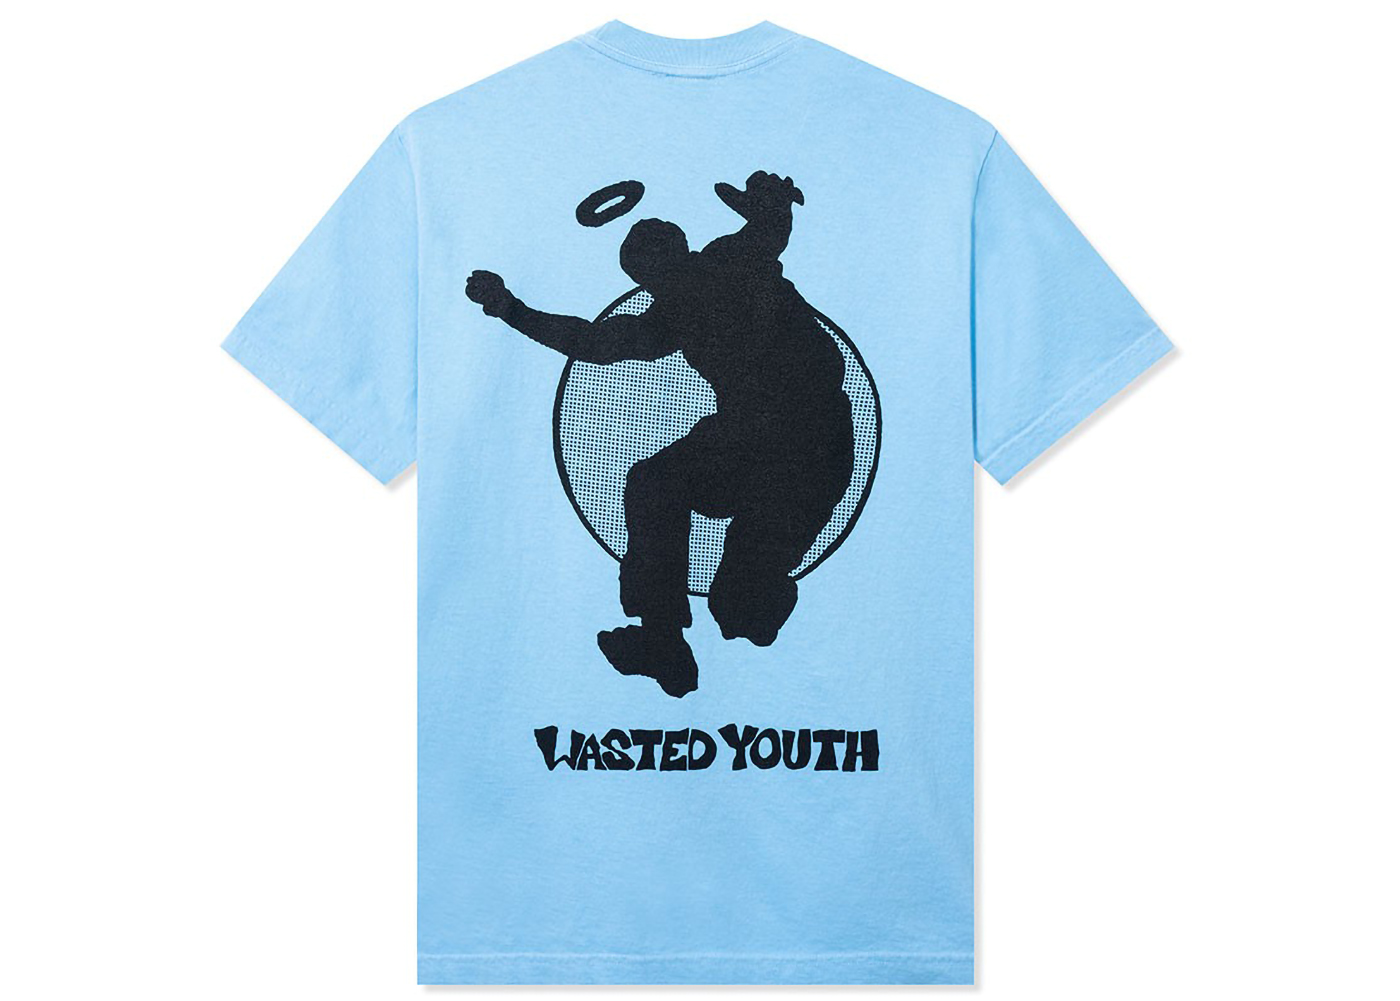 Wasted youth Tシャツ フラワー缶 2022 大阪 Verdy